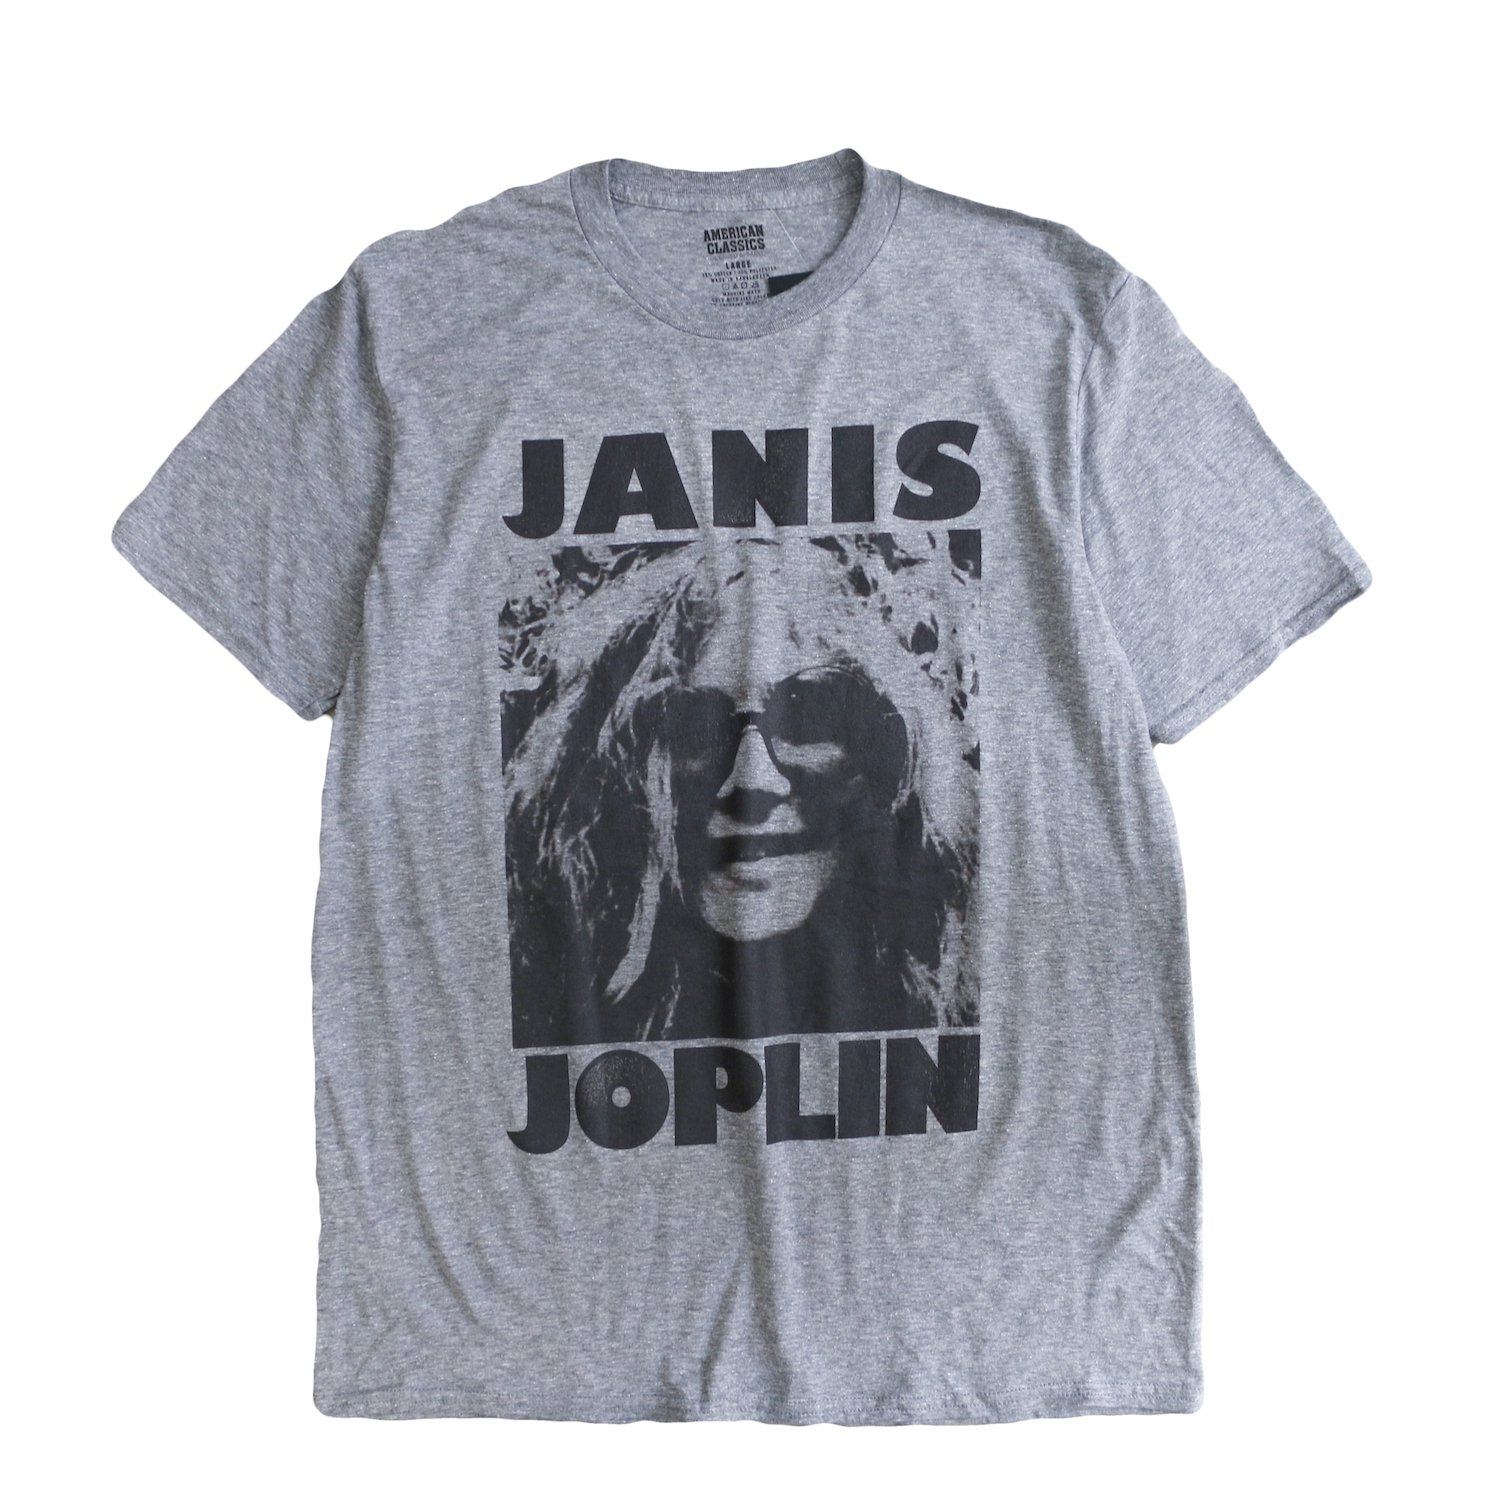 <img class='new_mark_img1' src='https://img.shop-pro.jp/img/new/icons8.gif' style='border:none;display:inline;margin:0px;padding:0px;width:auto;' /> Music Tee / S/S JANIS JOPLIN 